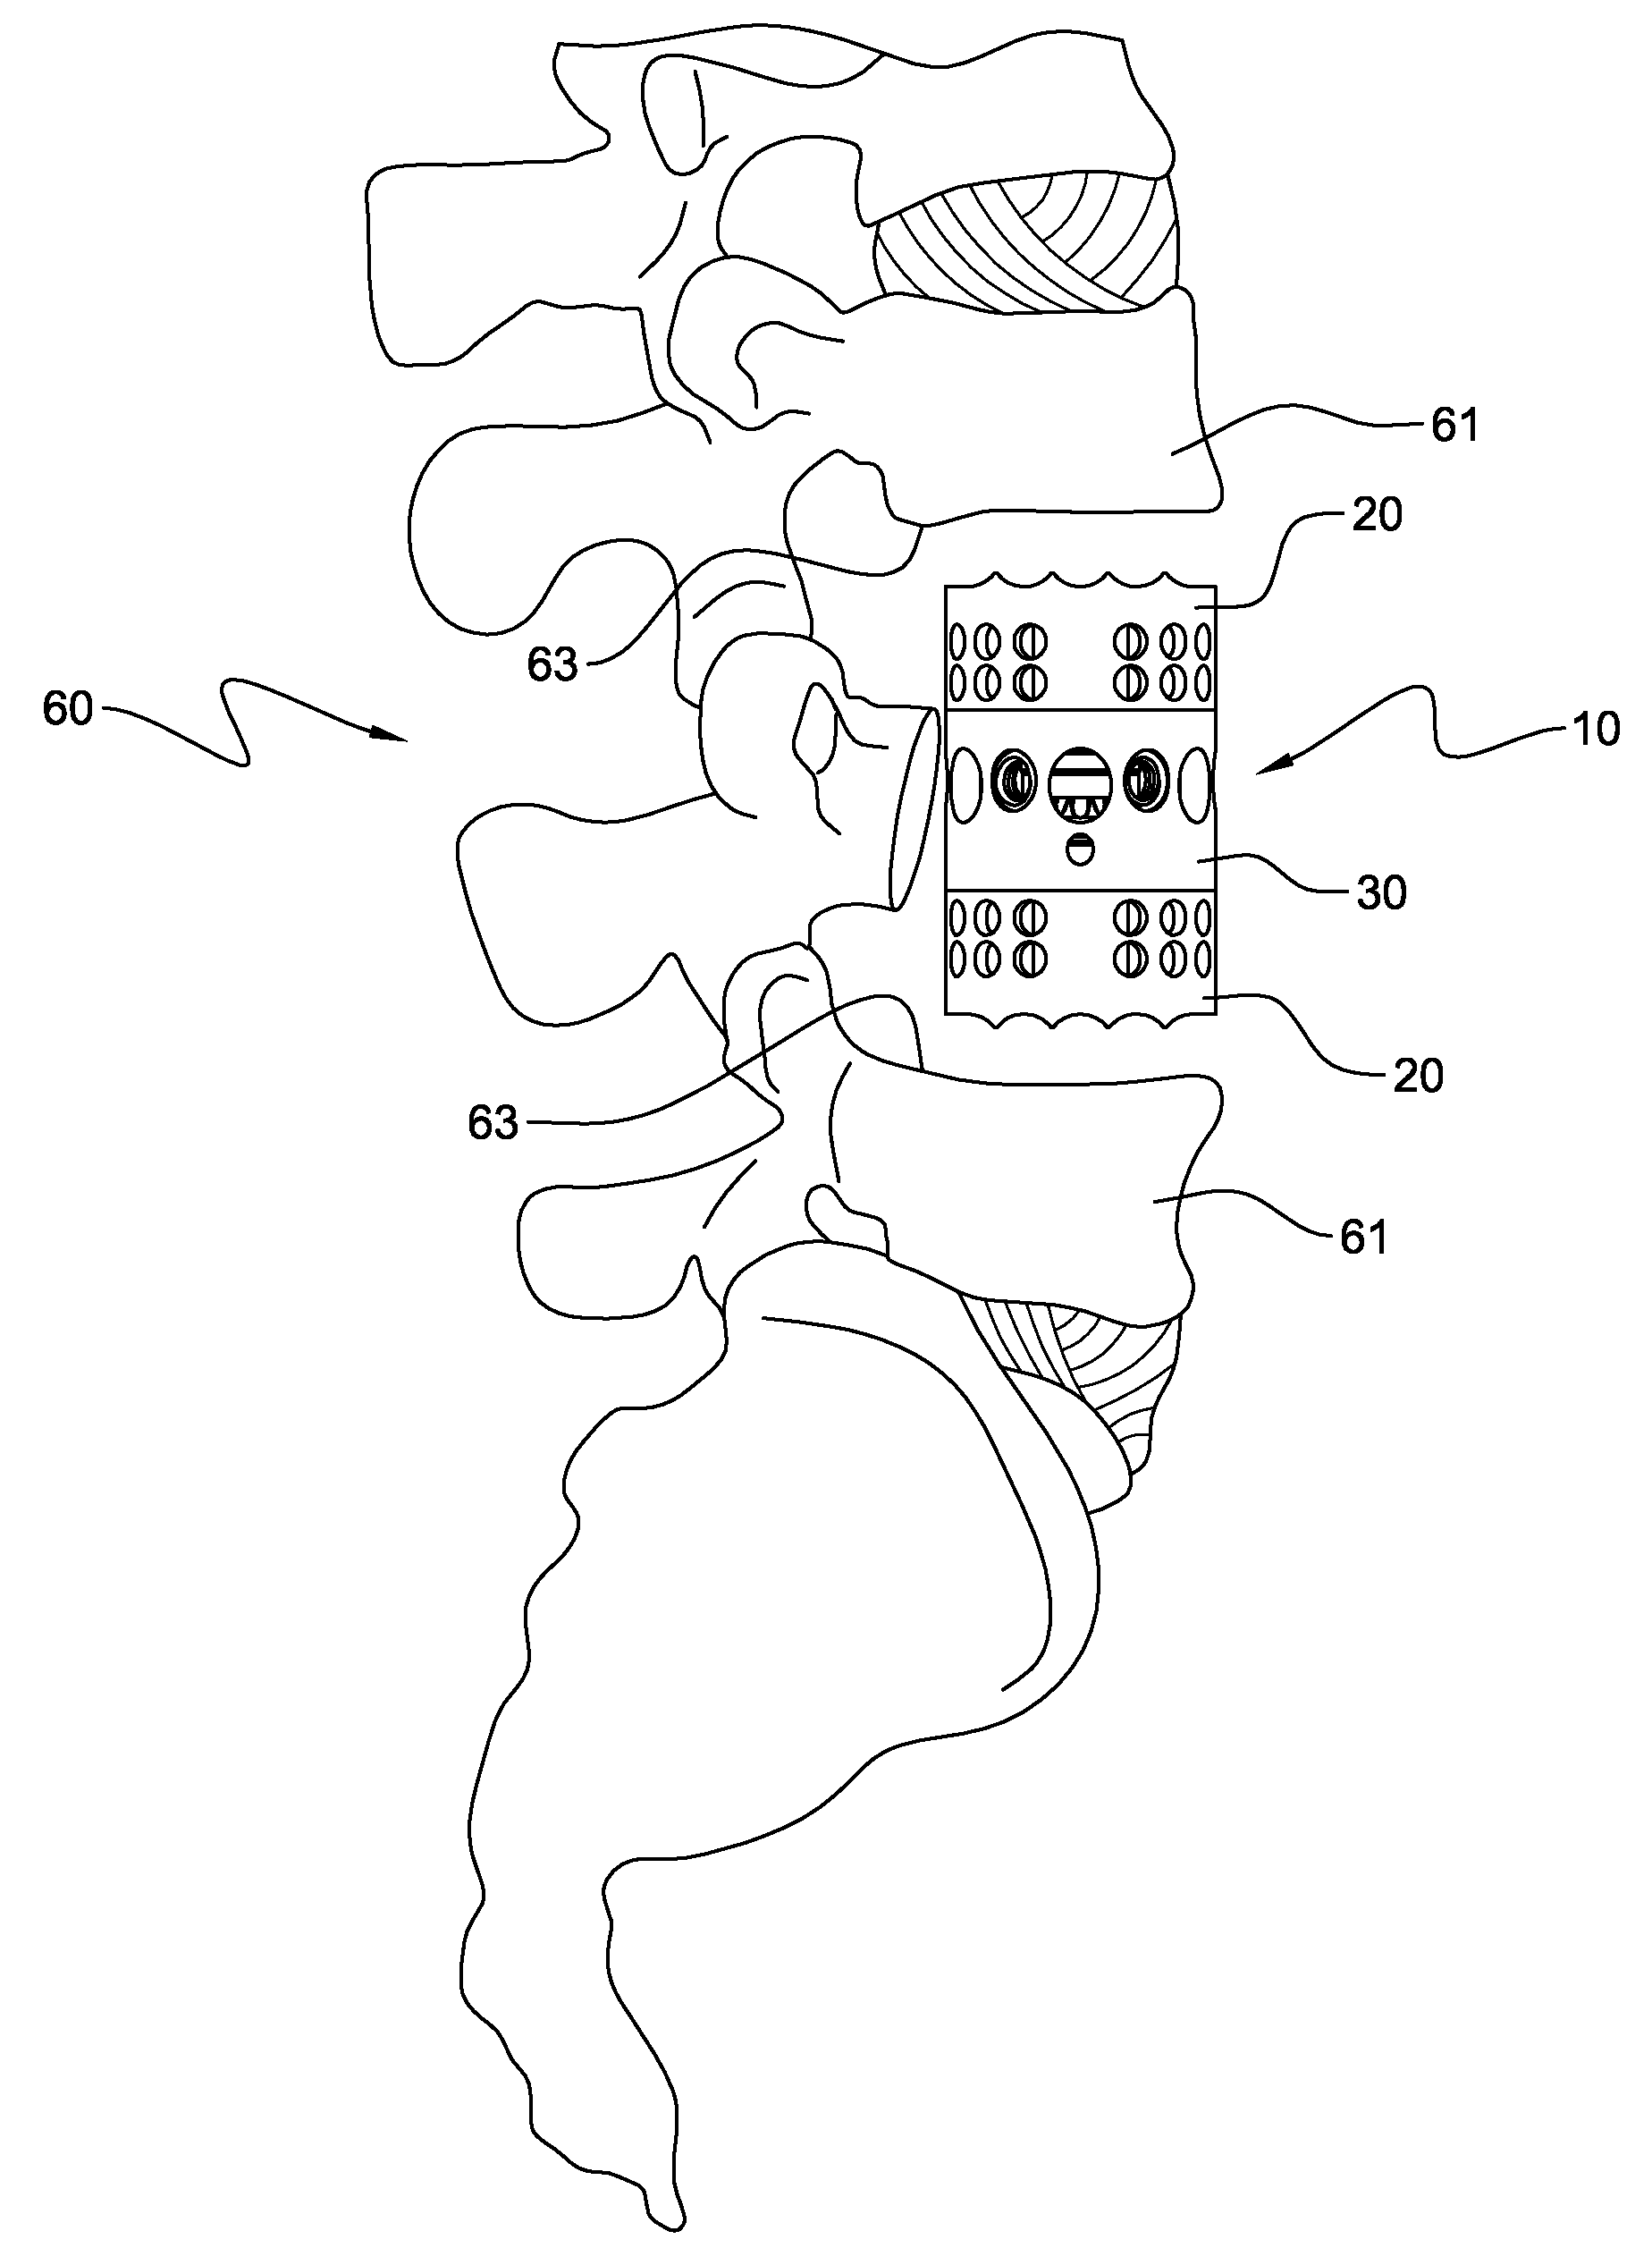 Vertebral body replacement device and method for use to maintain a space between two vertebral bodies within a spine